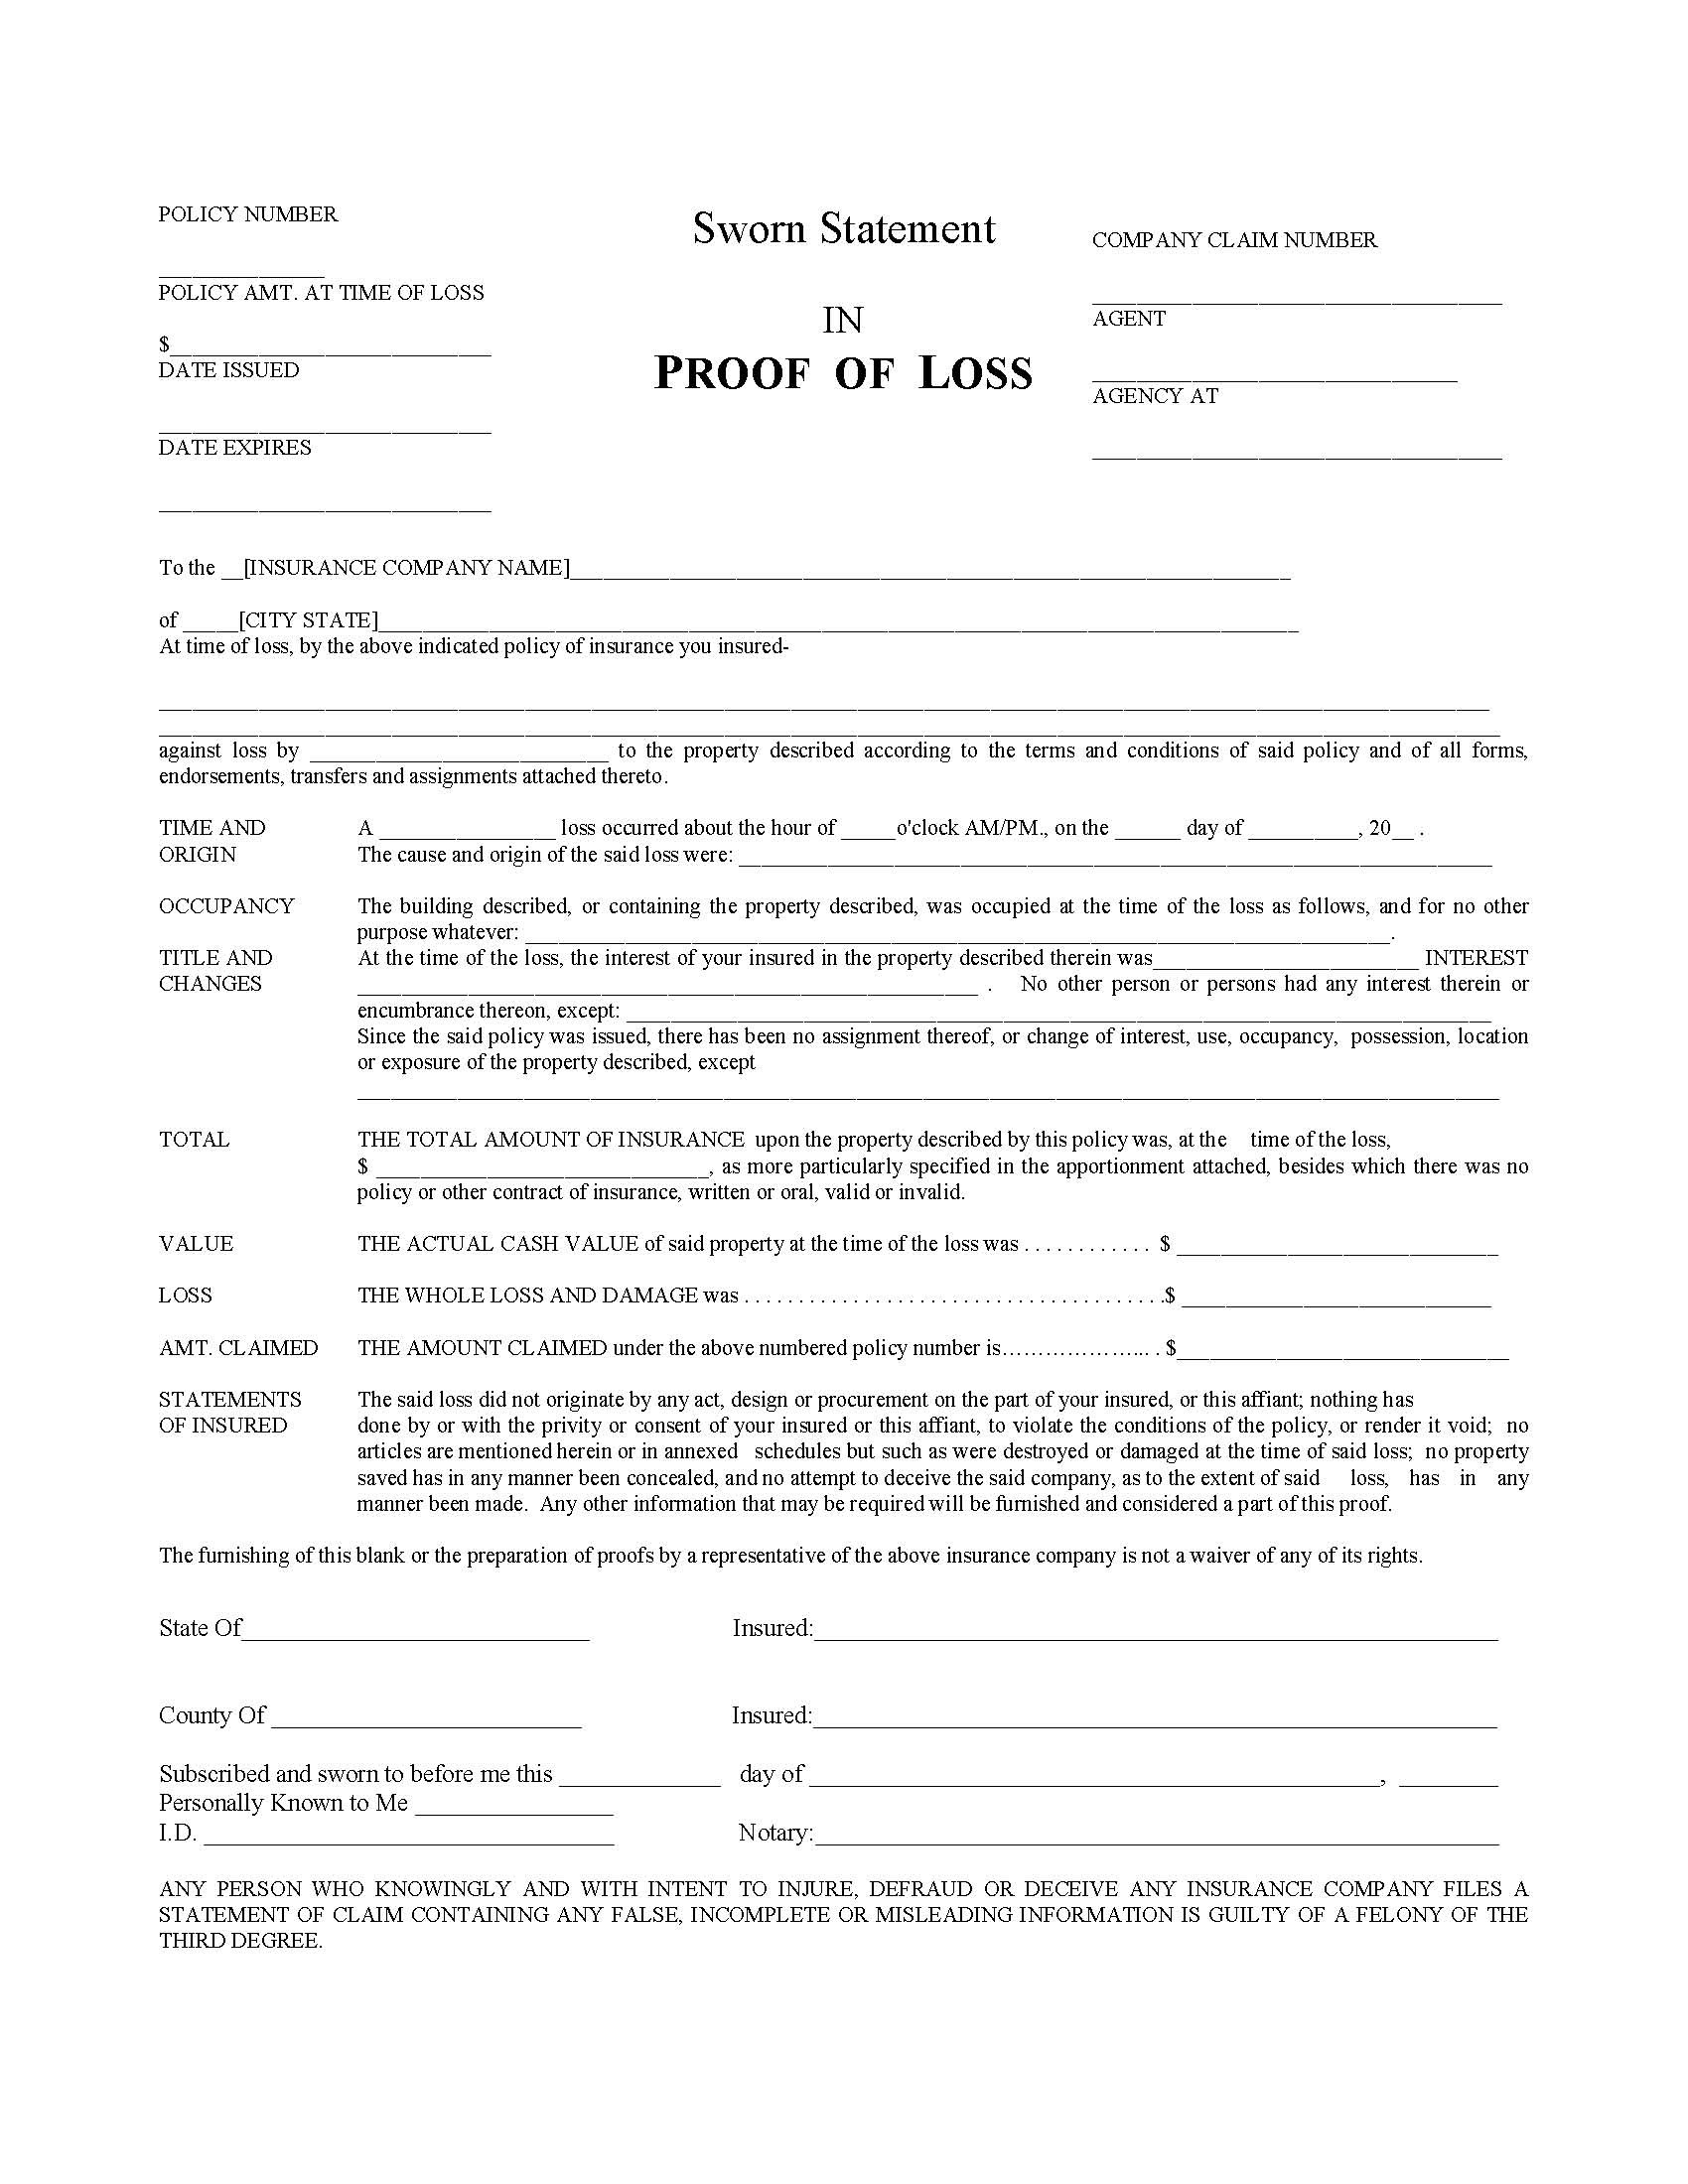 Taking A Look At Common Proof Of Loss Form Property Insurance Document State Farm